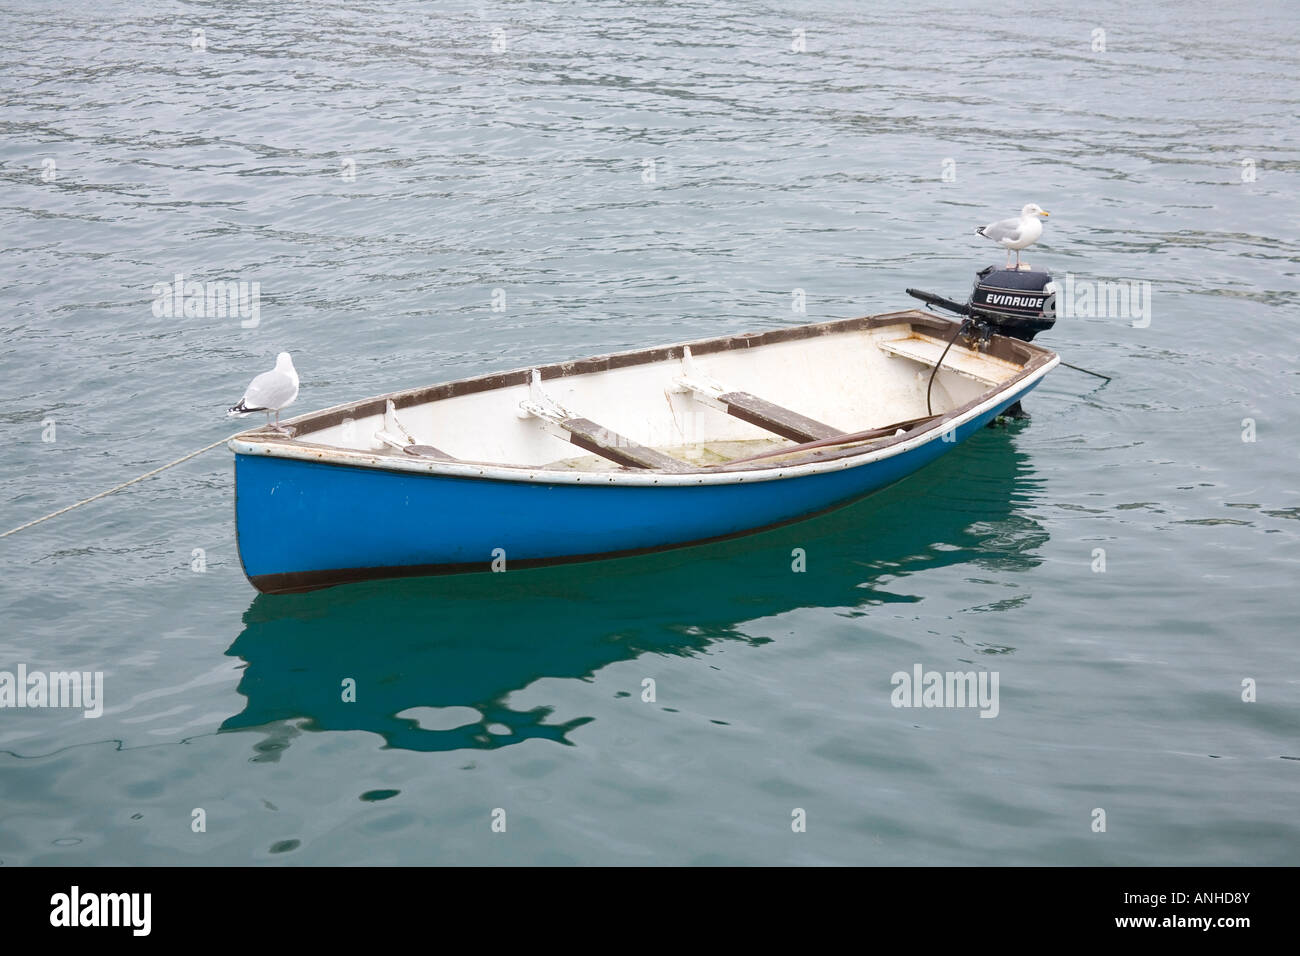 Boat moored up in St Mawes Harbour, Cornwall England. Stock Photo